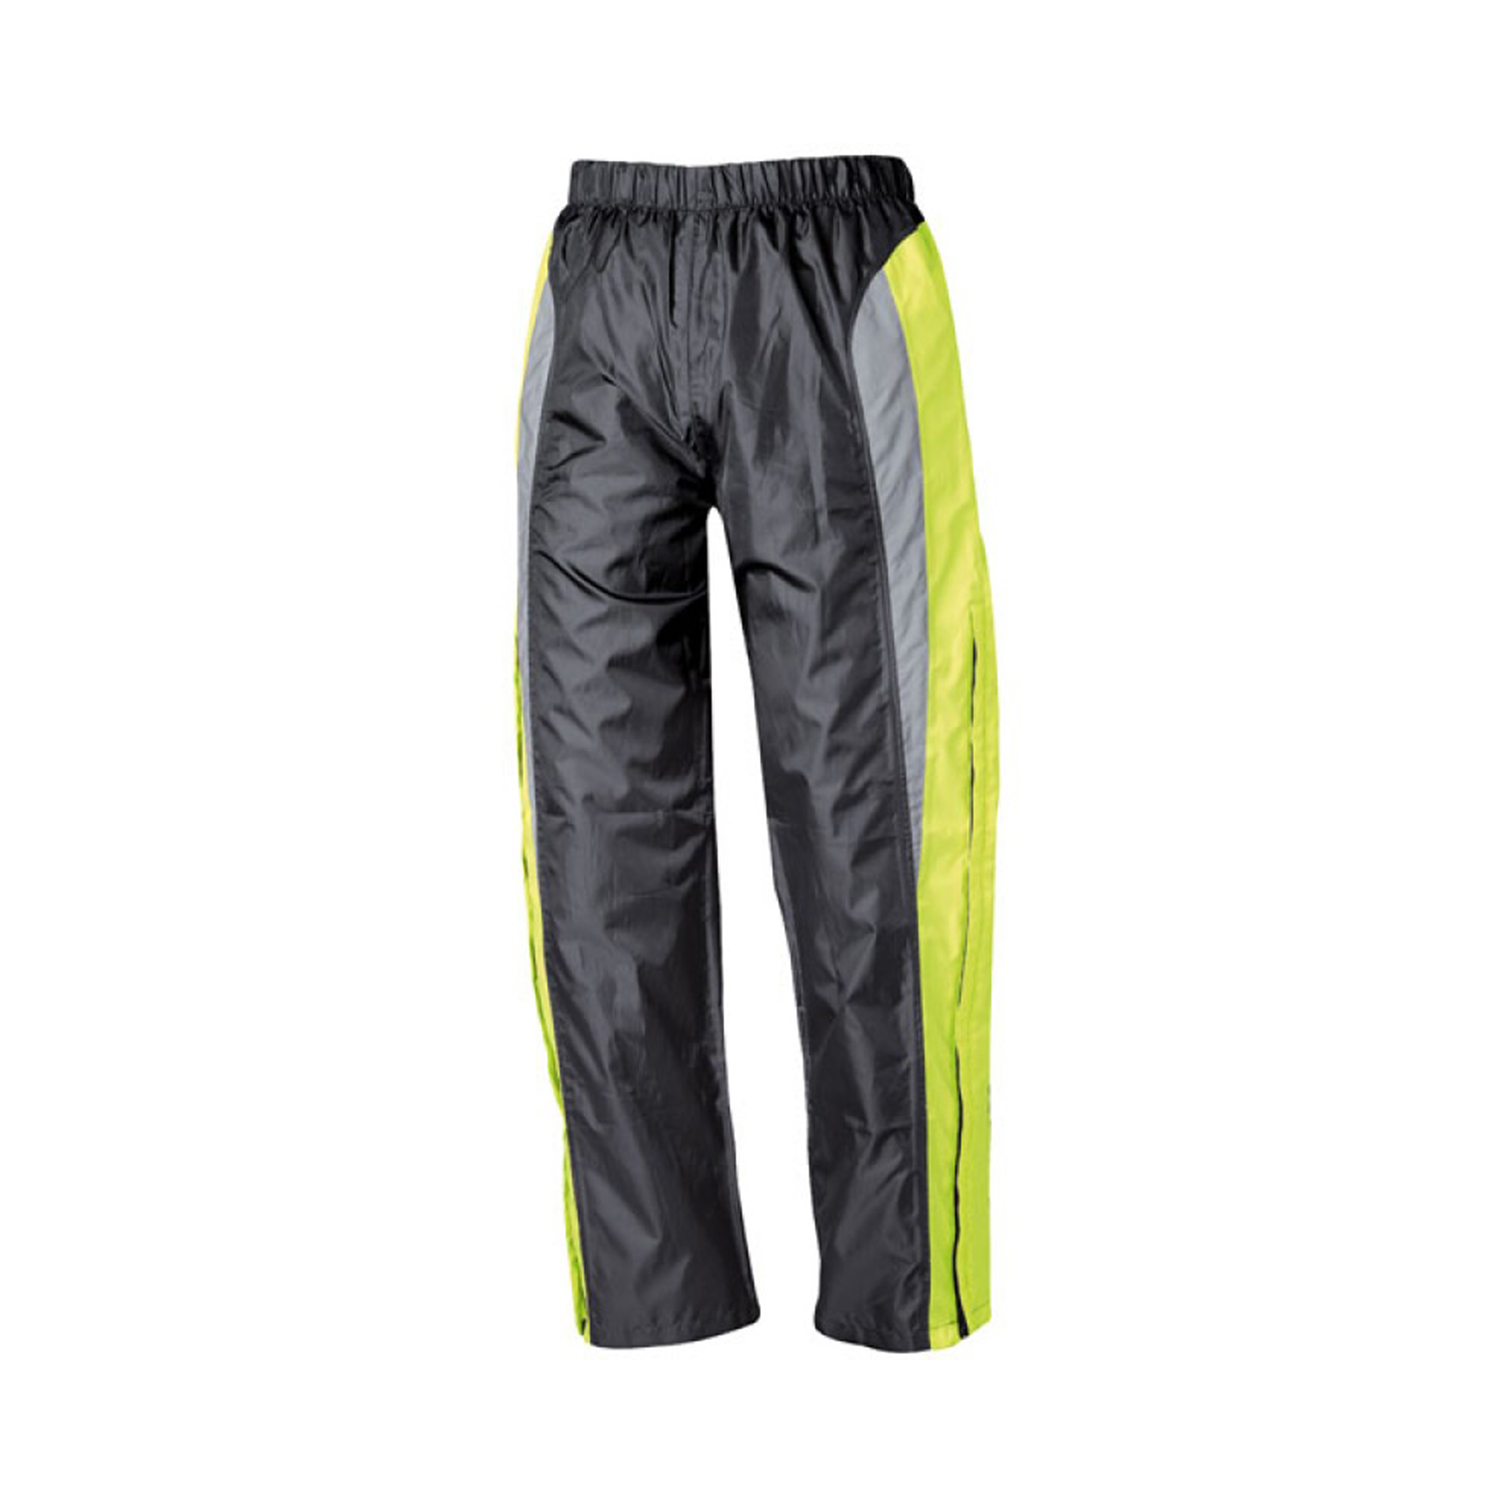 Held Tempest Rain Pants - Available in Various Sizes